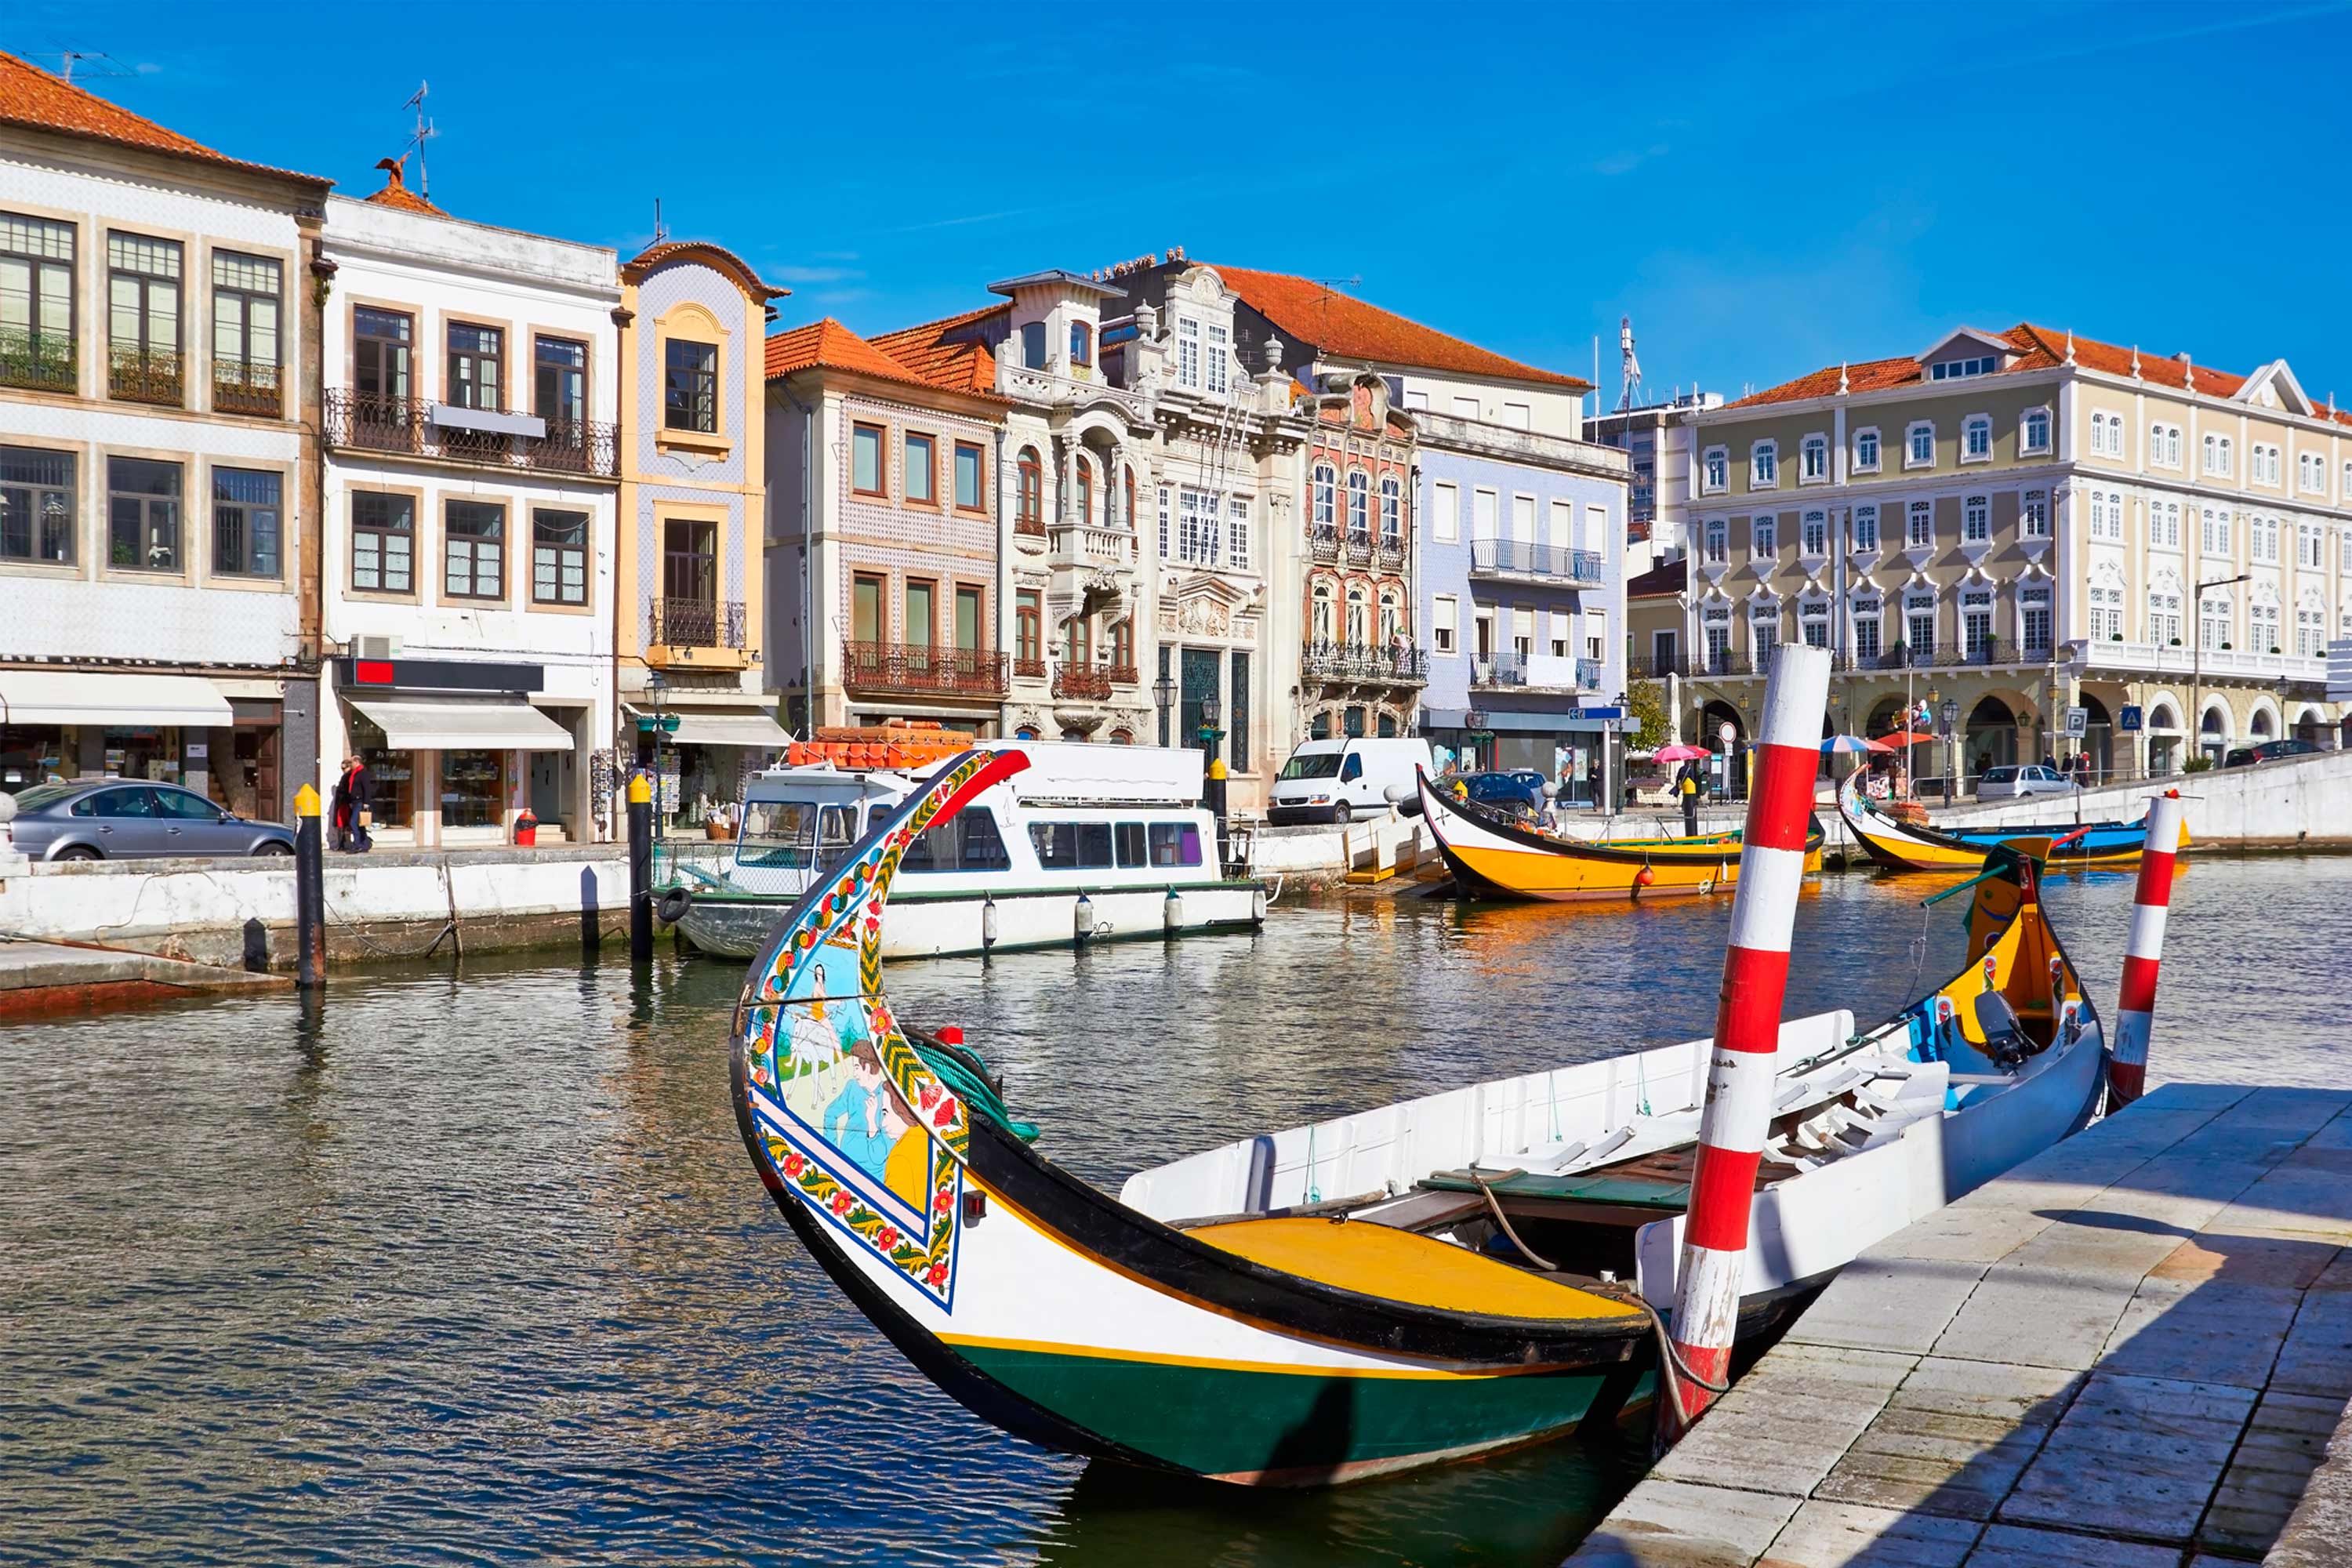 Aveiro wallpapers, Man Made, HQ Aveiro pictures | 4K Wallpapers 2019